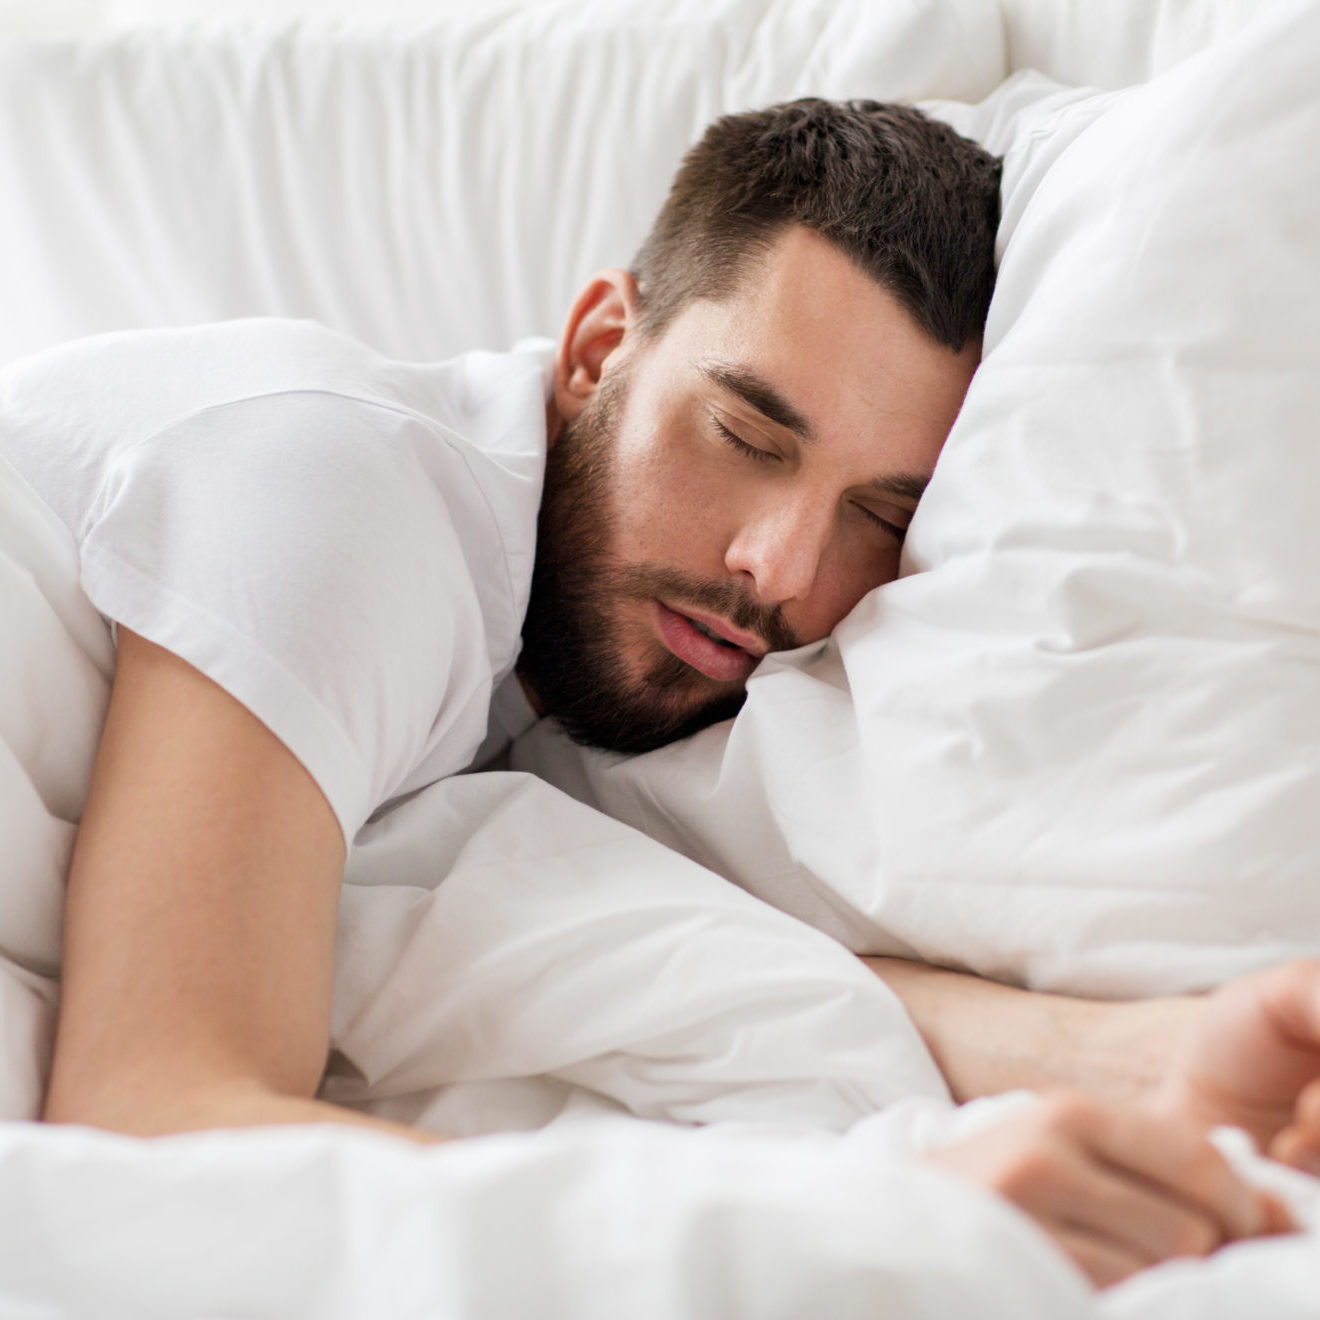 man able to sleep after receiving alpha-stim therapy